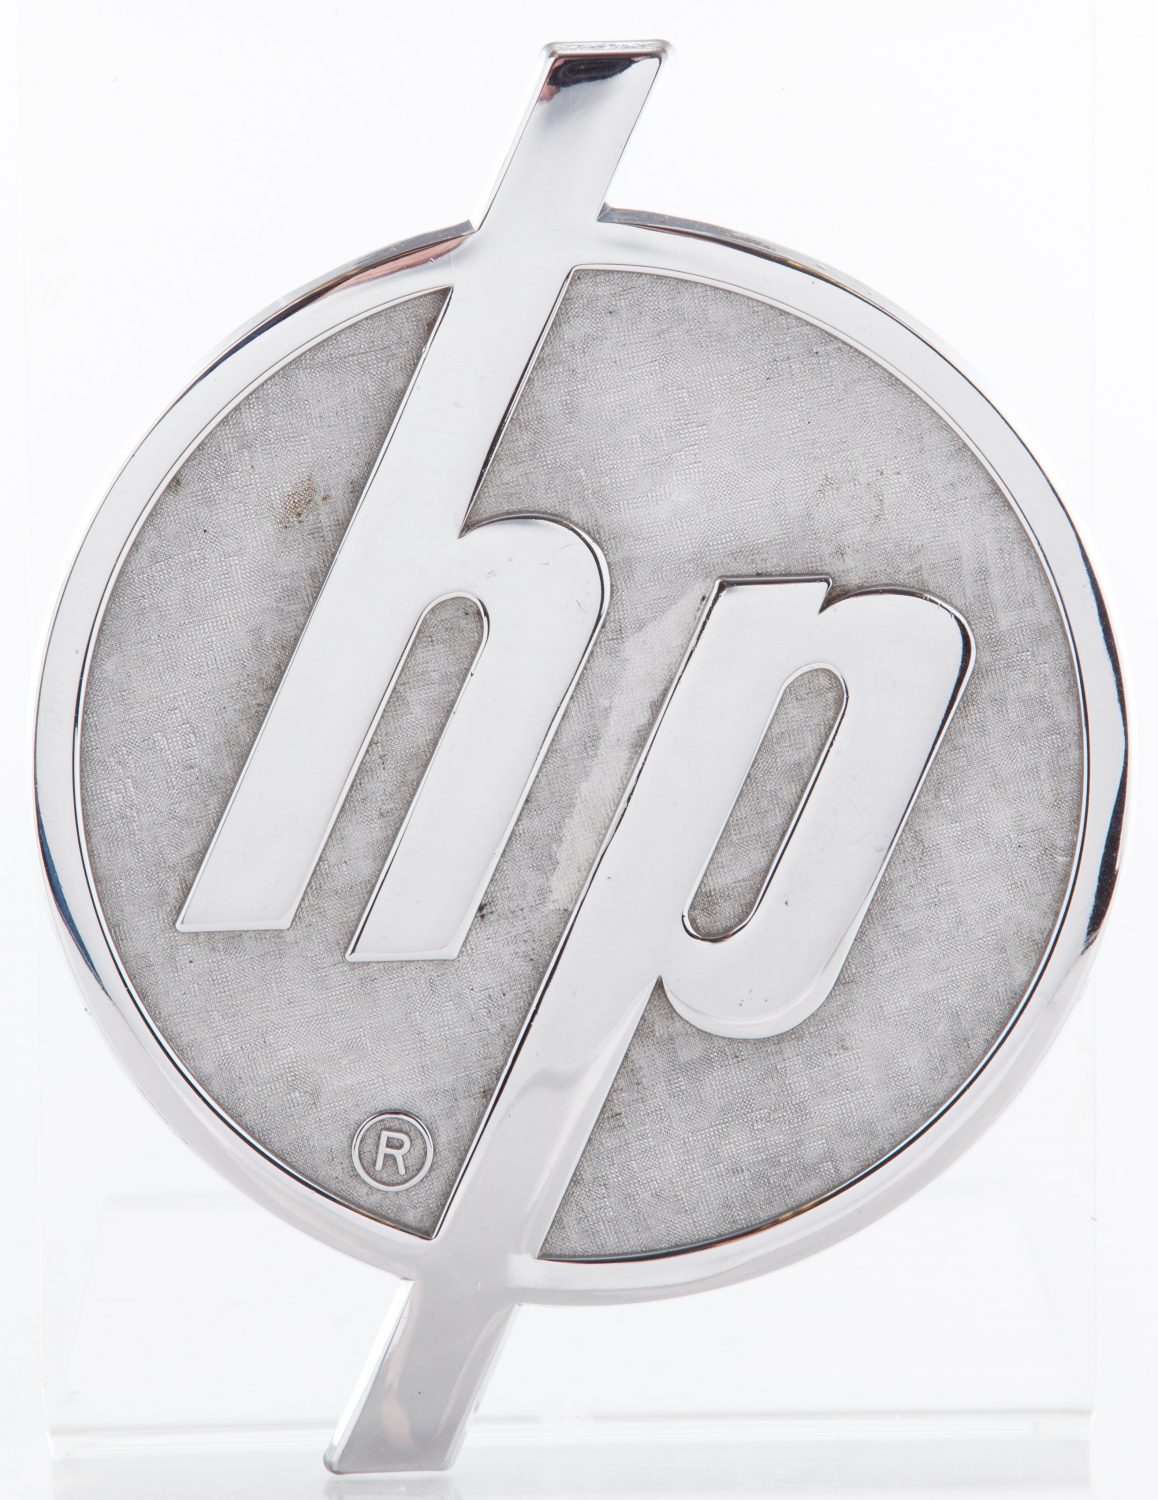 The Hewlett-Packard logo that was simplified in 1946 to make it more legible and easier to engrave.